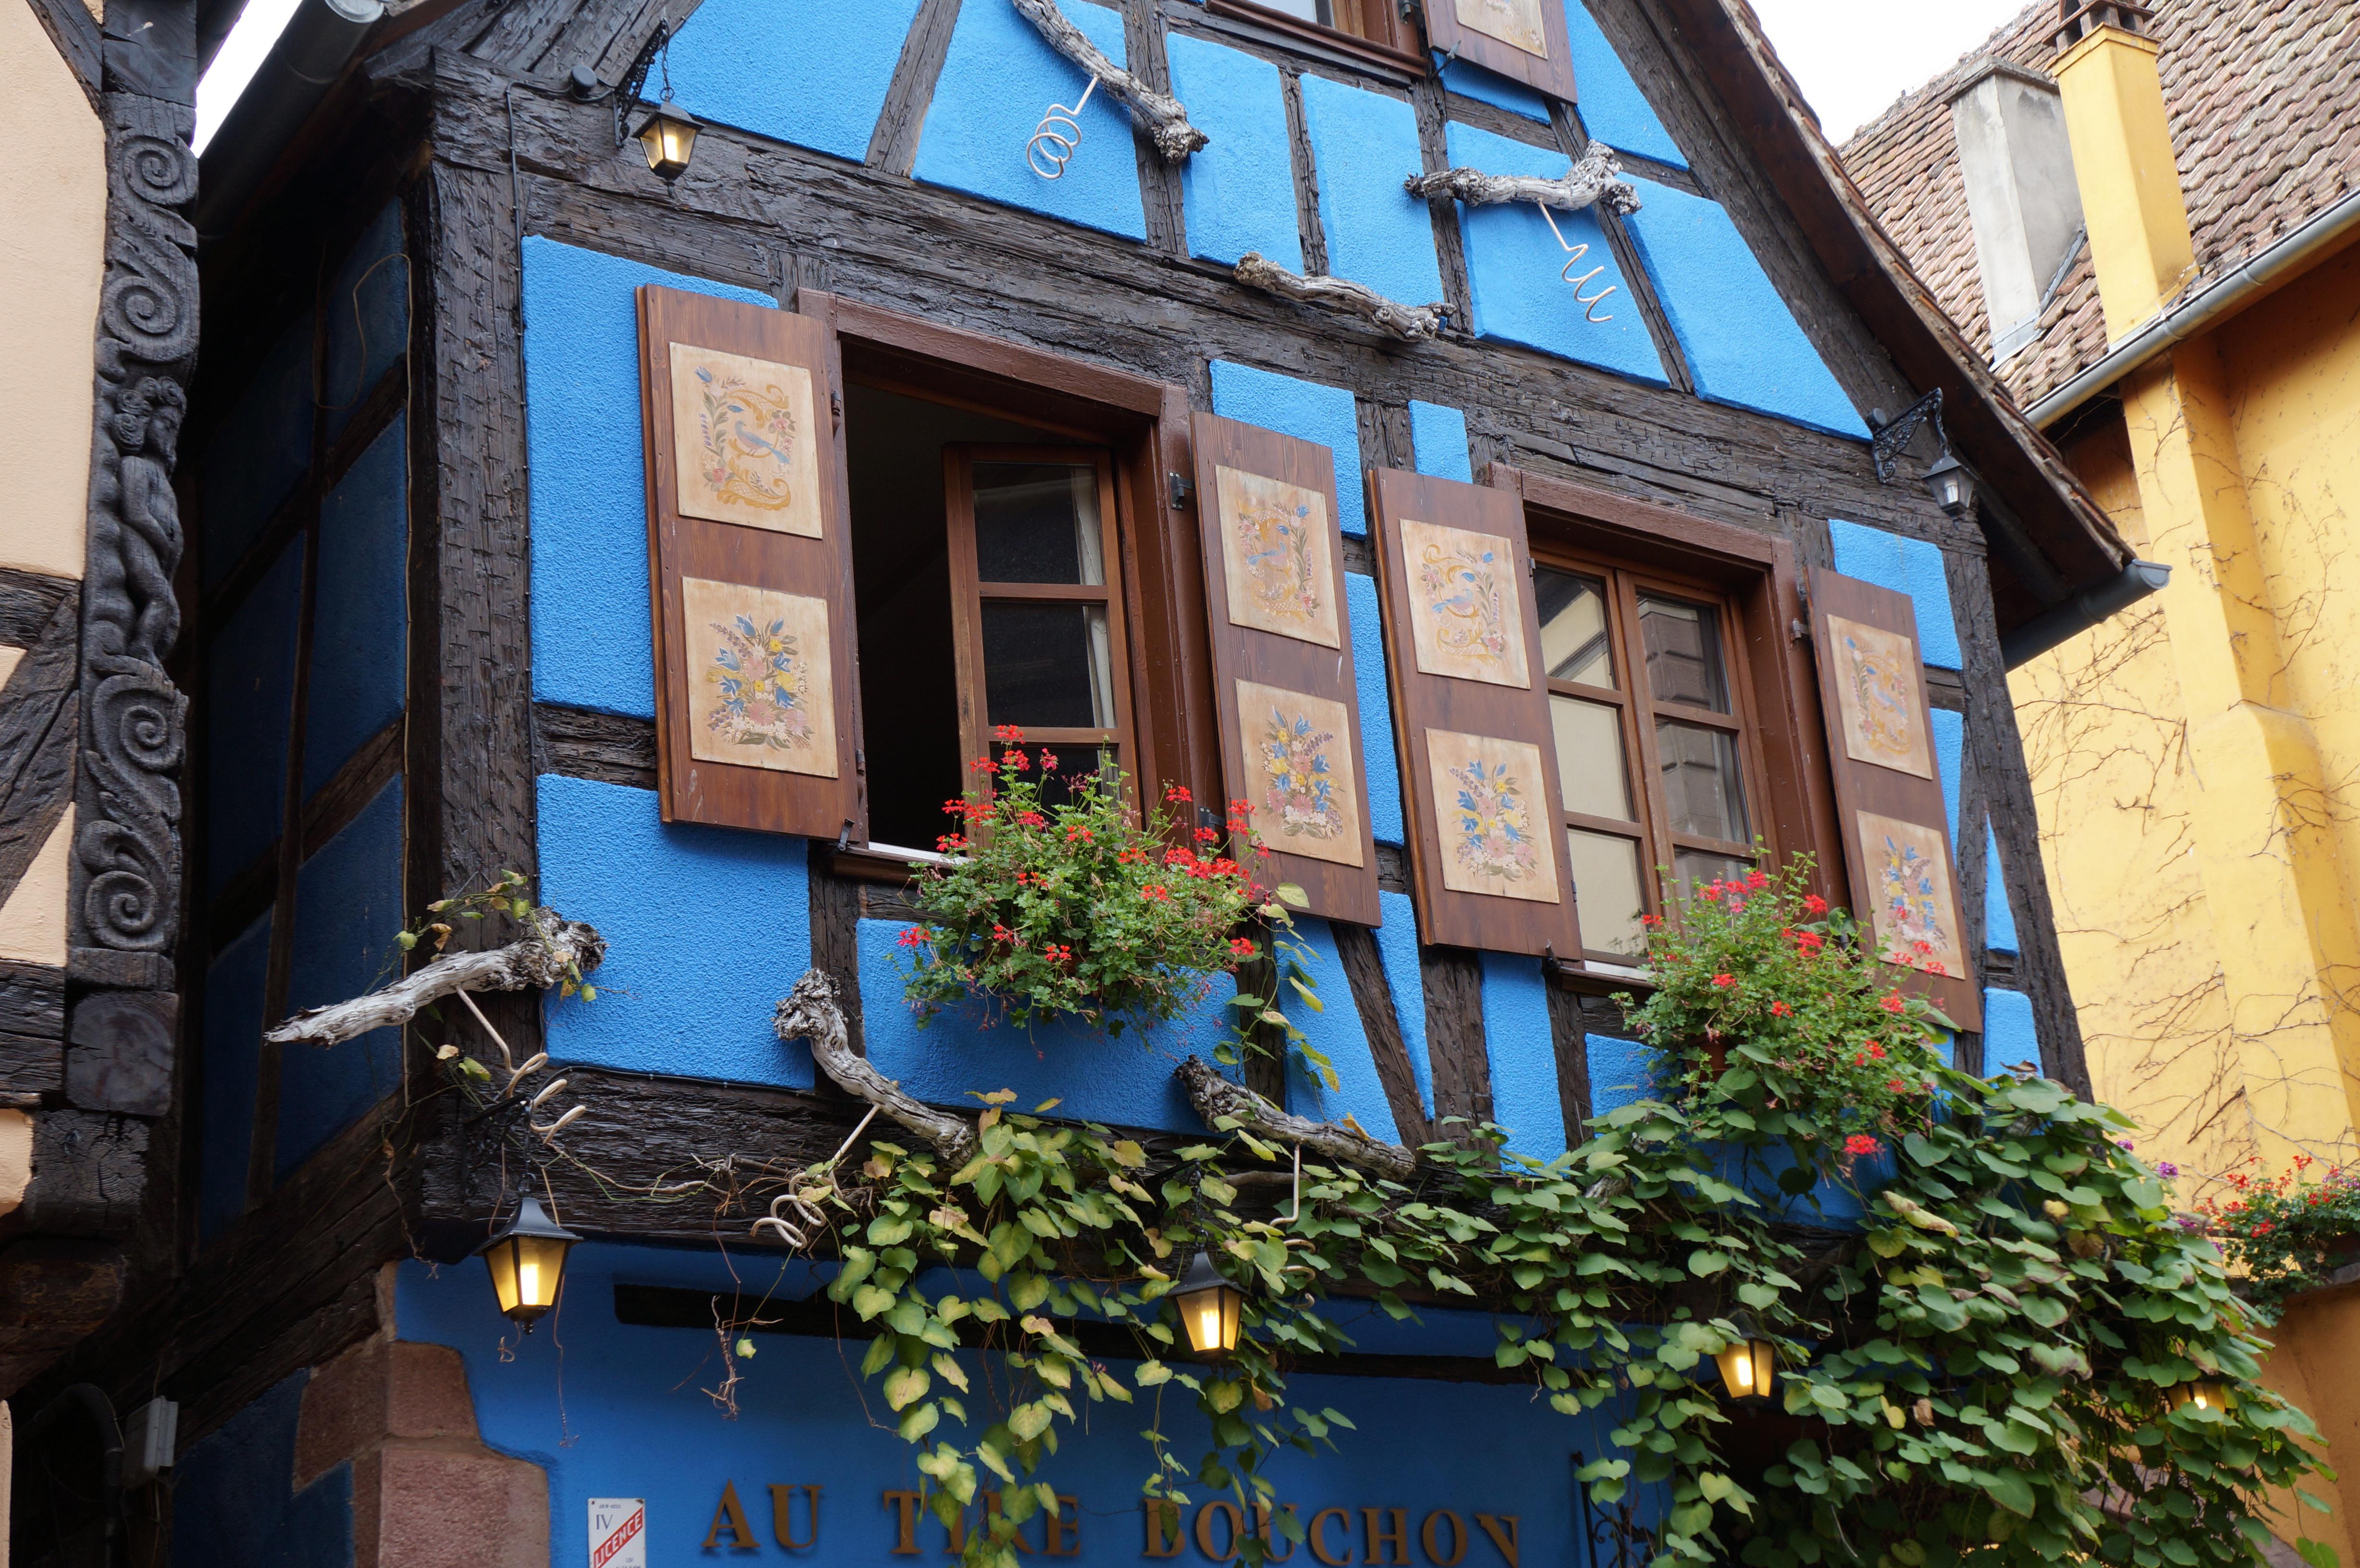 Follow the same street until you reach number 38, where you will see the noble courtyard of Berchhem.  One of his most beautiful houses on the street at number 42 is Gourmet (Alsace Tourist Office).